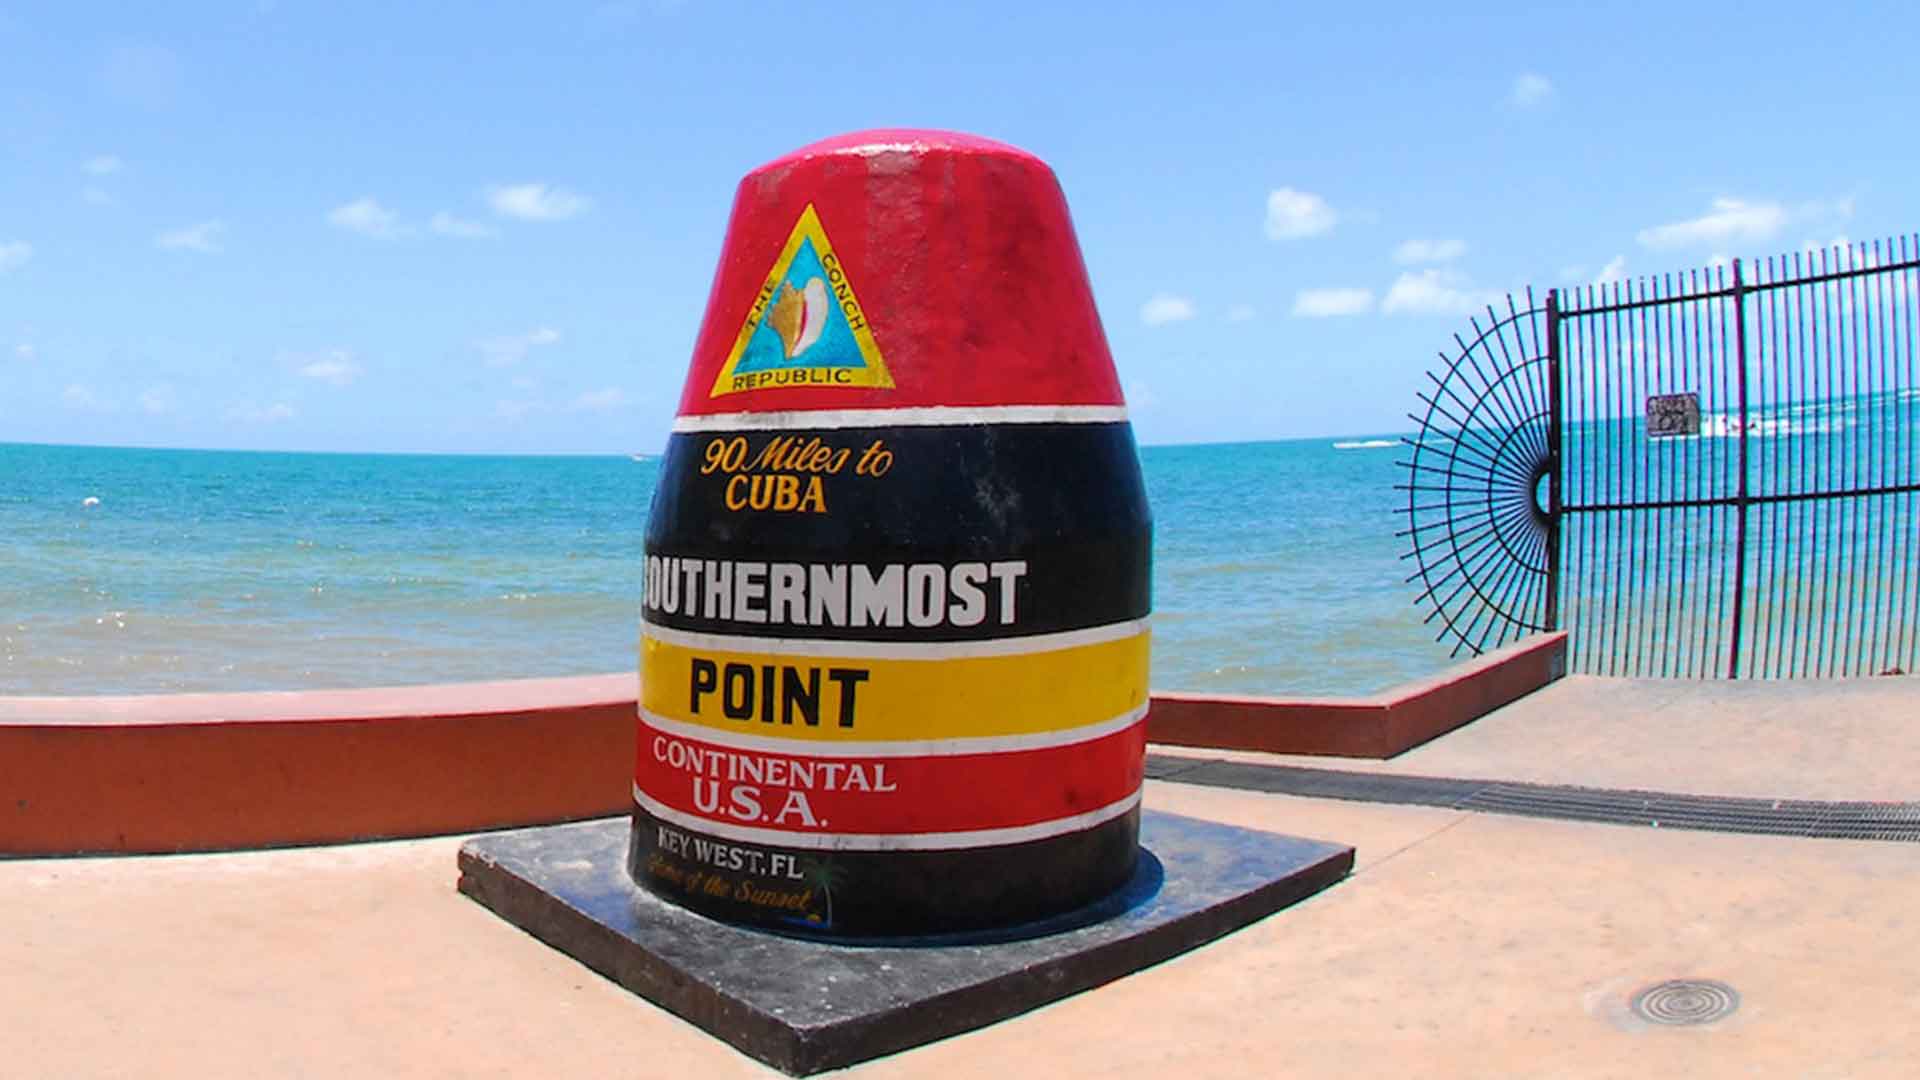 Image of the southern most point.